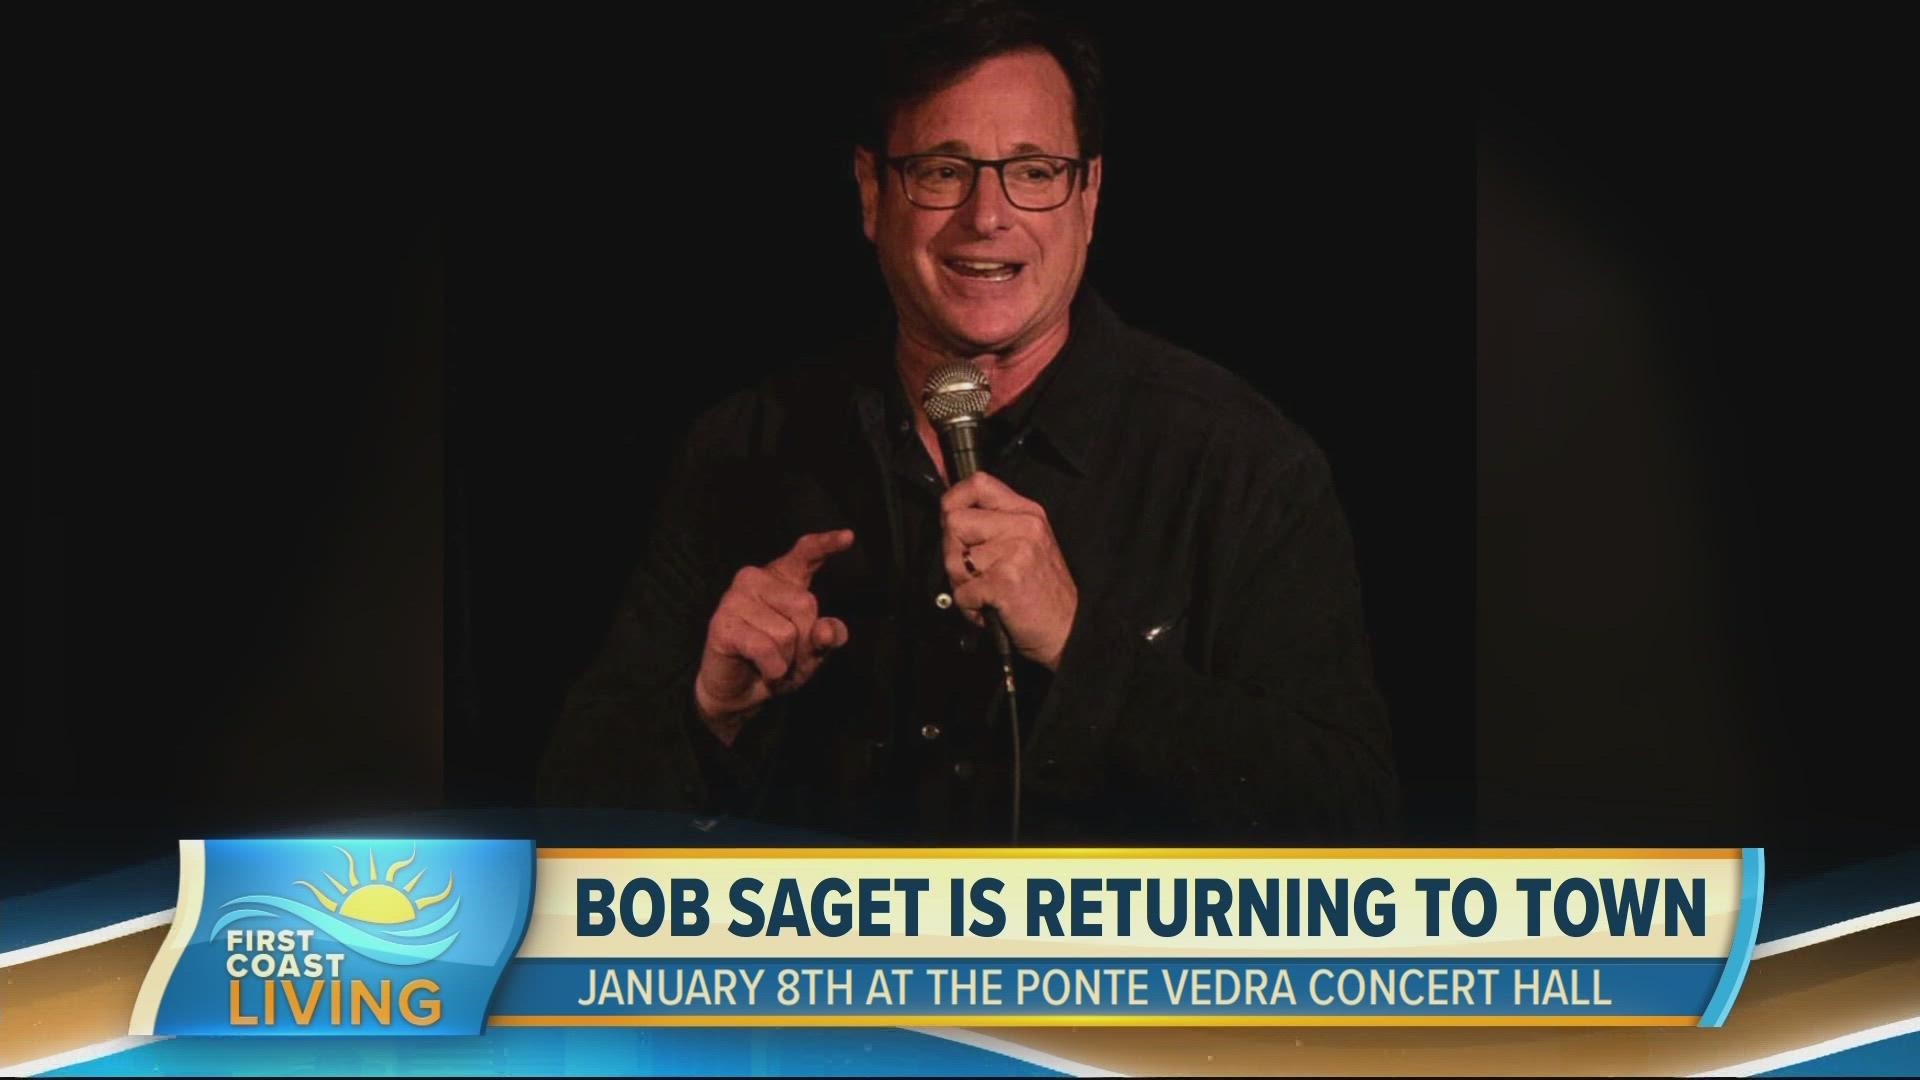 You can catch Bob Saget Saturday, January 8th at the Ponte Vedra Concert Hall.